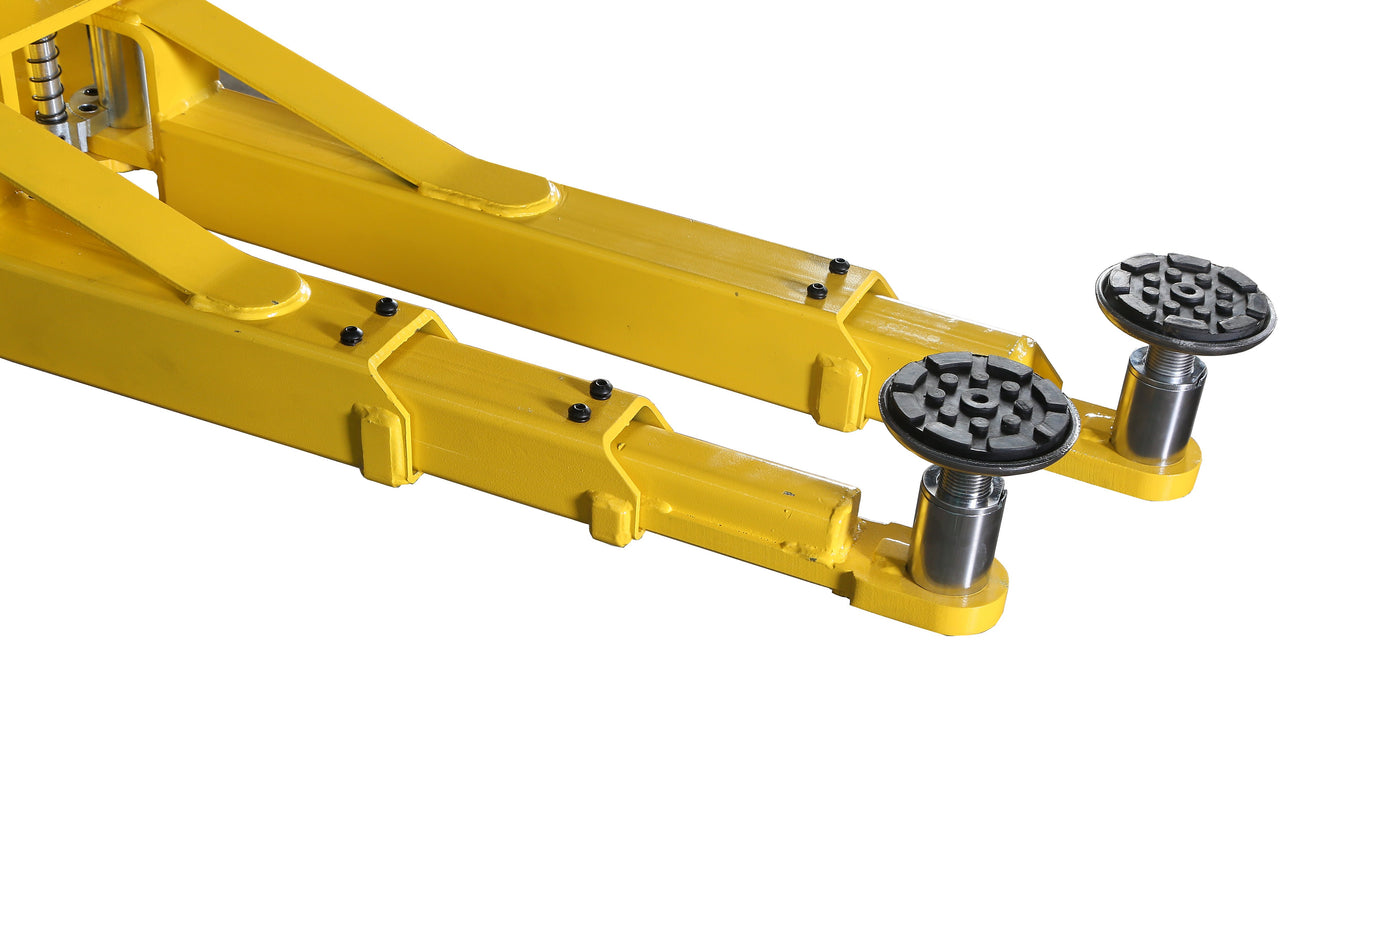 EGA Master expands its range of hydraulic tools with the new breakers